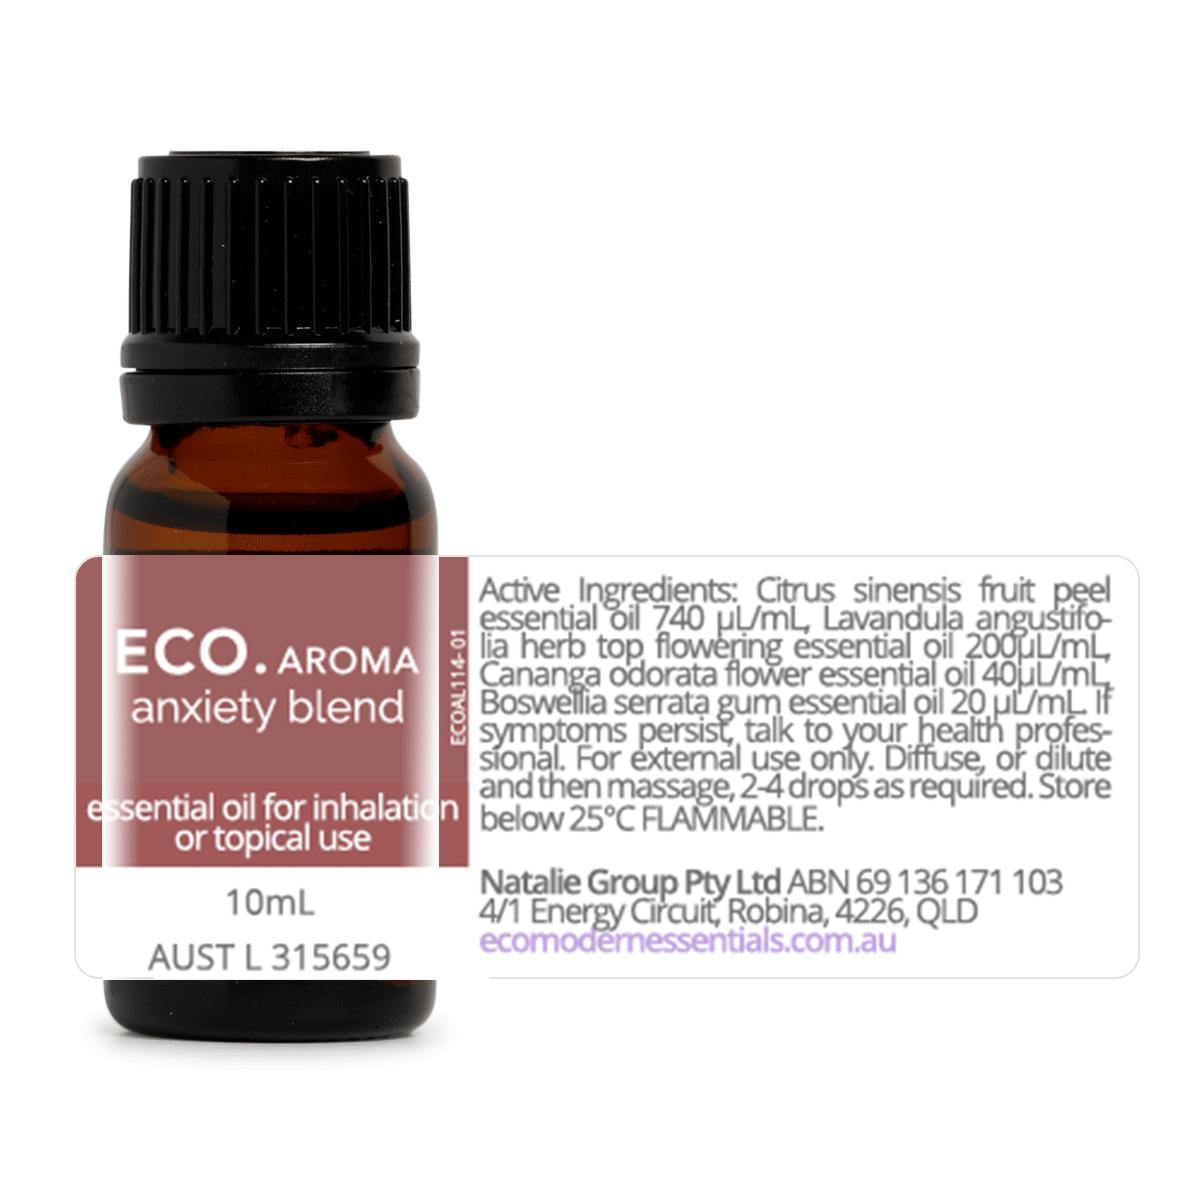 Whole Store - ECO. Modern Essentials - Anxiety Blend Oil